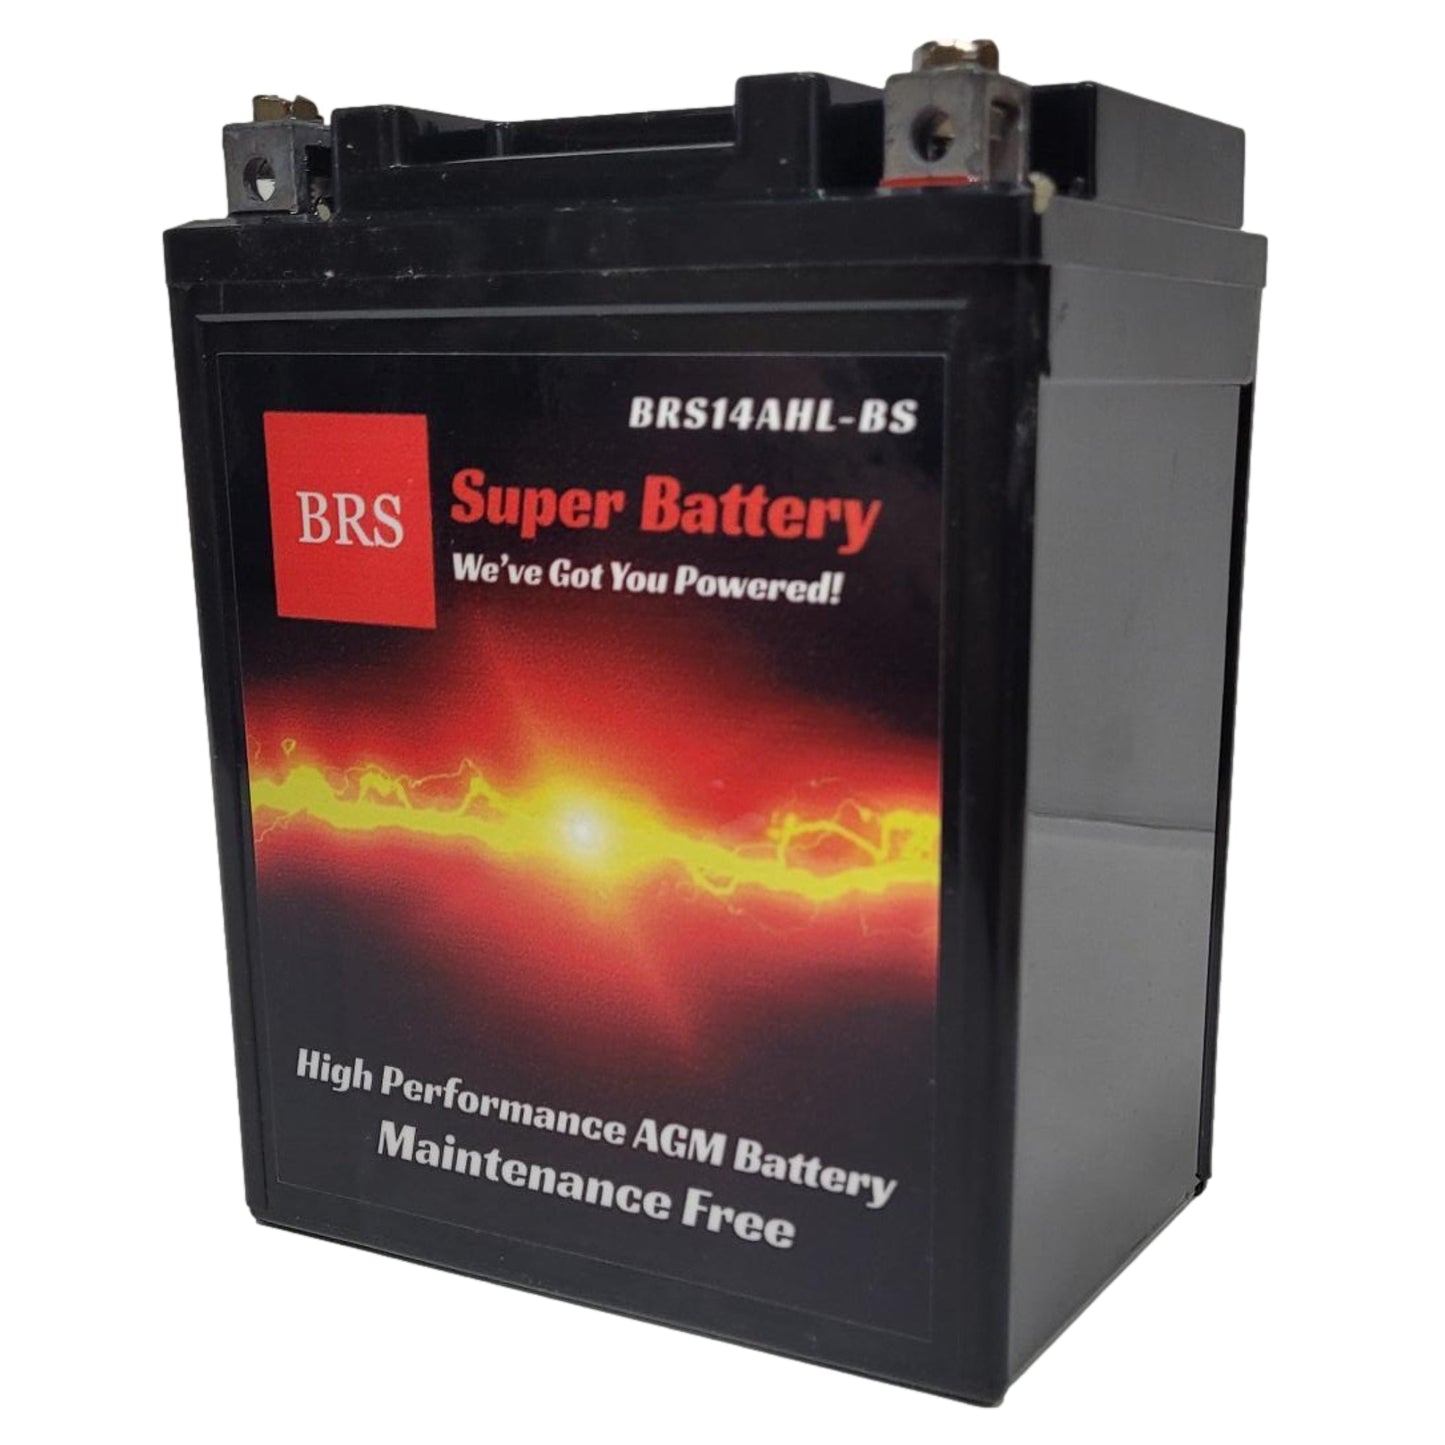 High Performance BRS14AHL-BS 10 Year Battery & Smart Charger / Maintainer Combo Bundle Kit 12v Sealed AGM PowerSports Battery - BRS Super Battery